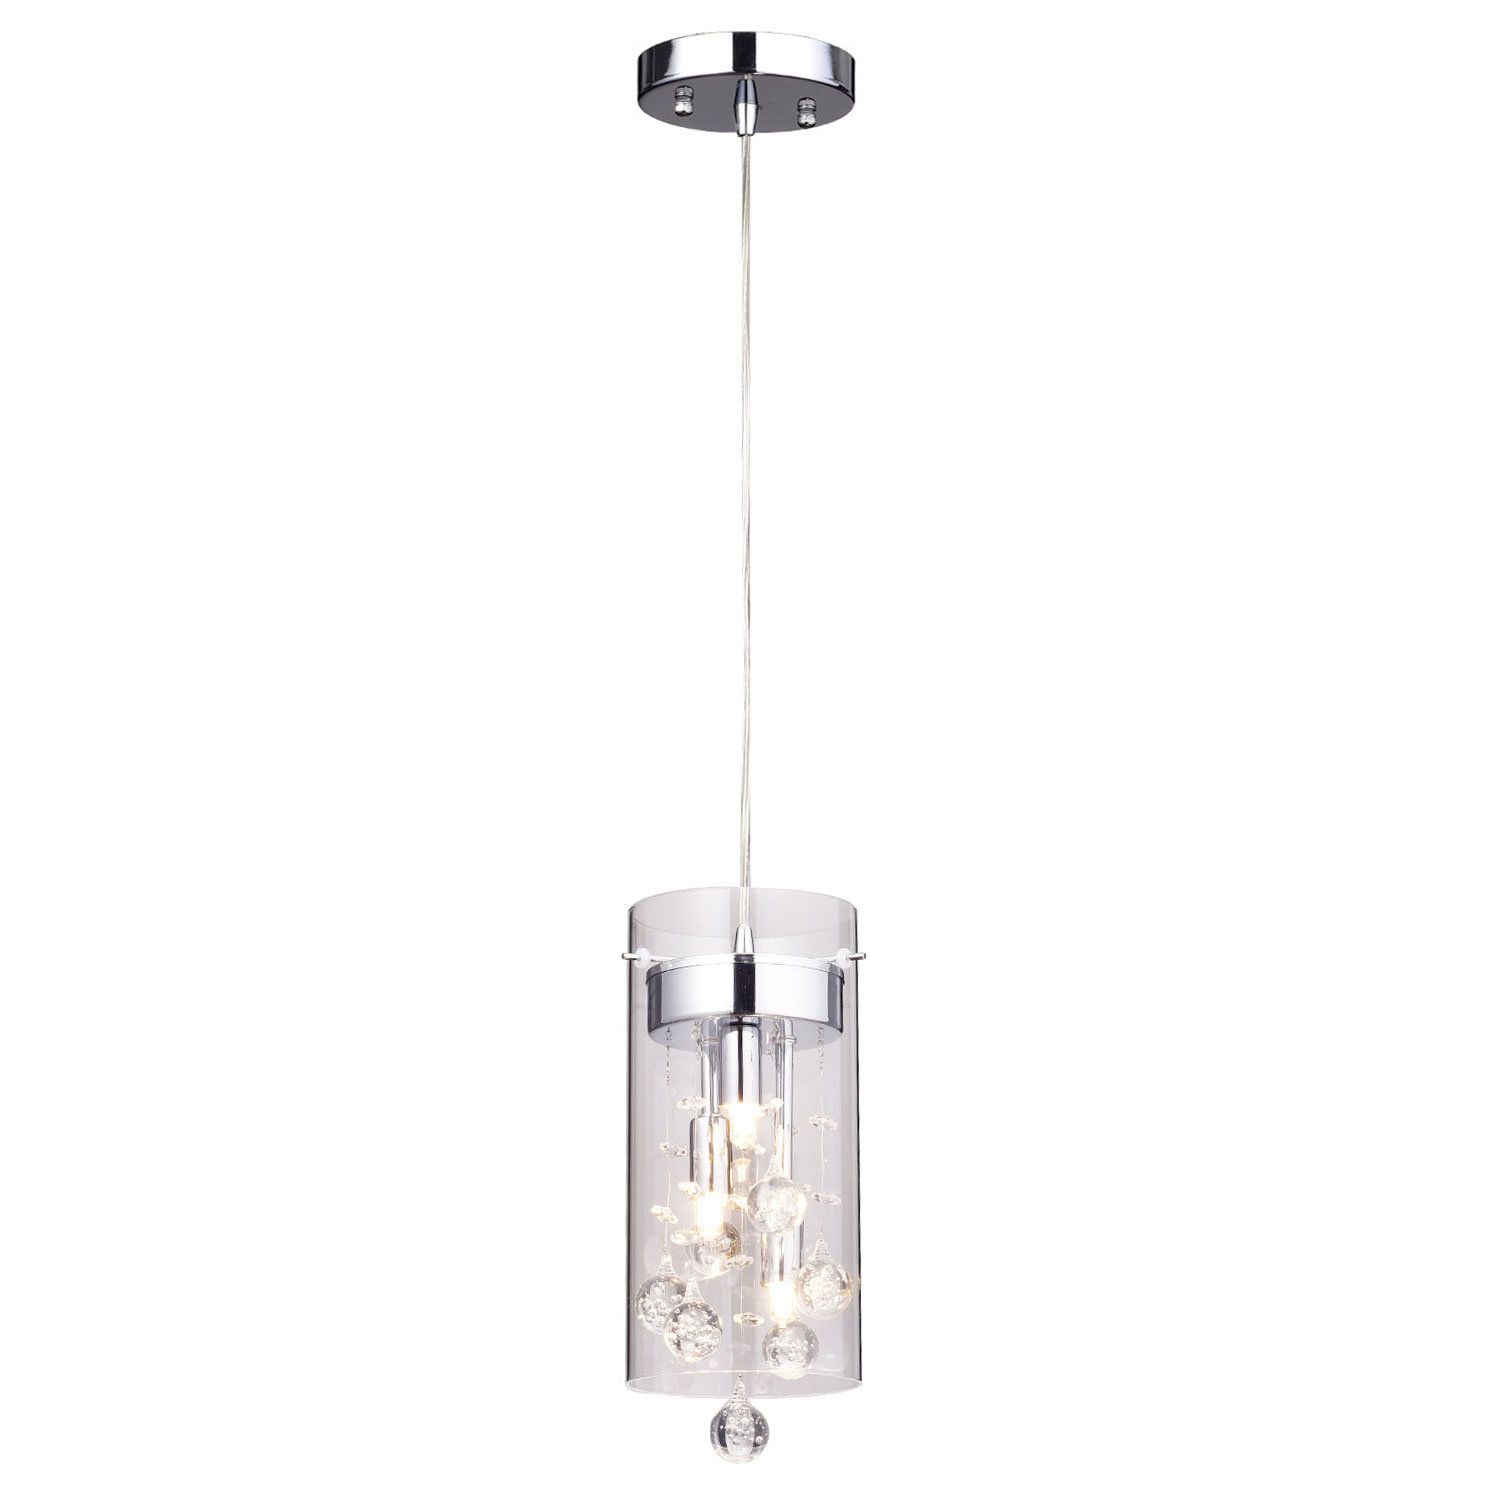 Crystal Mini (less Than 10" Wide) Pendant Lighting You'll With Regard To Kraker 1 Light Single Cylinder Pendants (View 7 of 30)